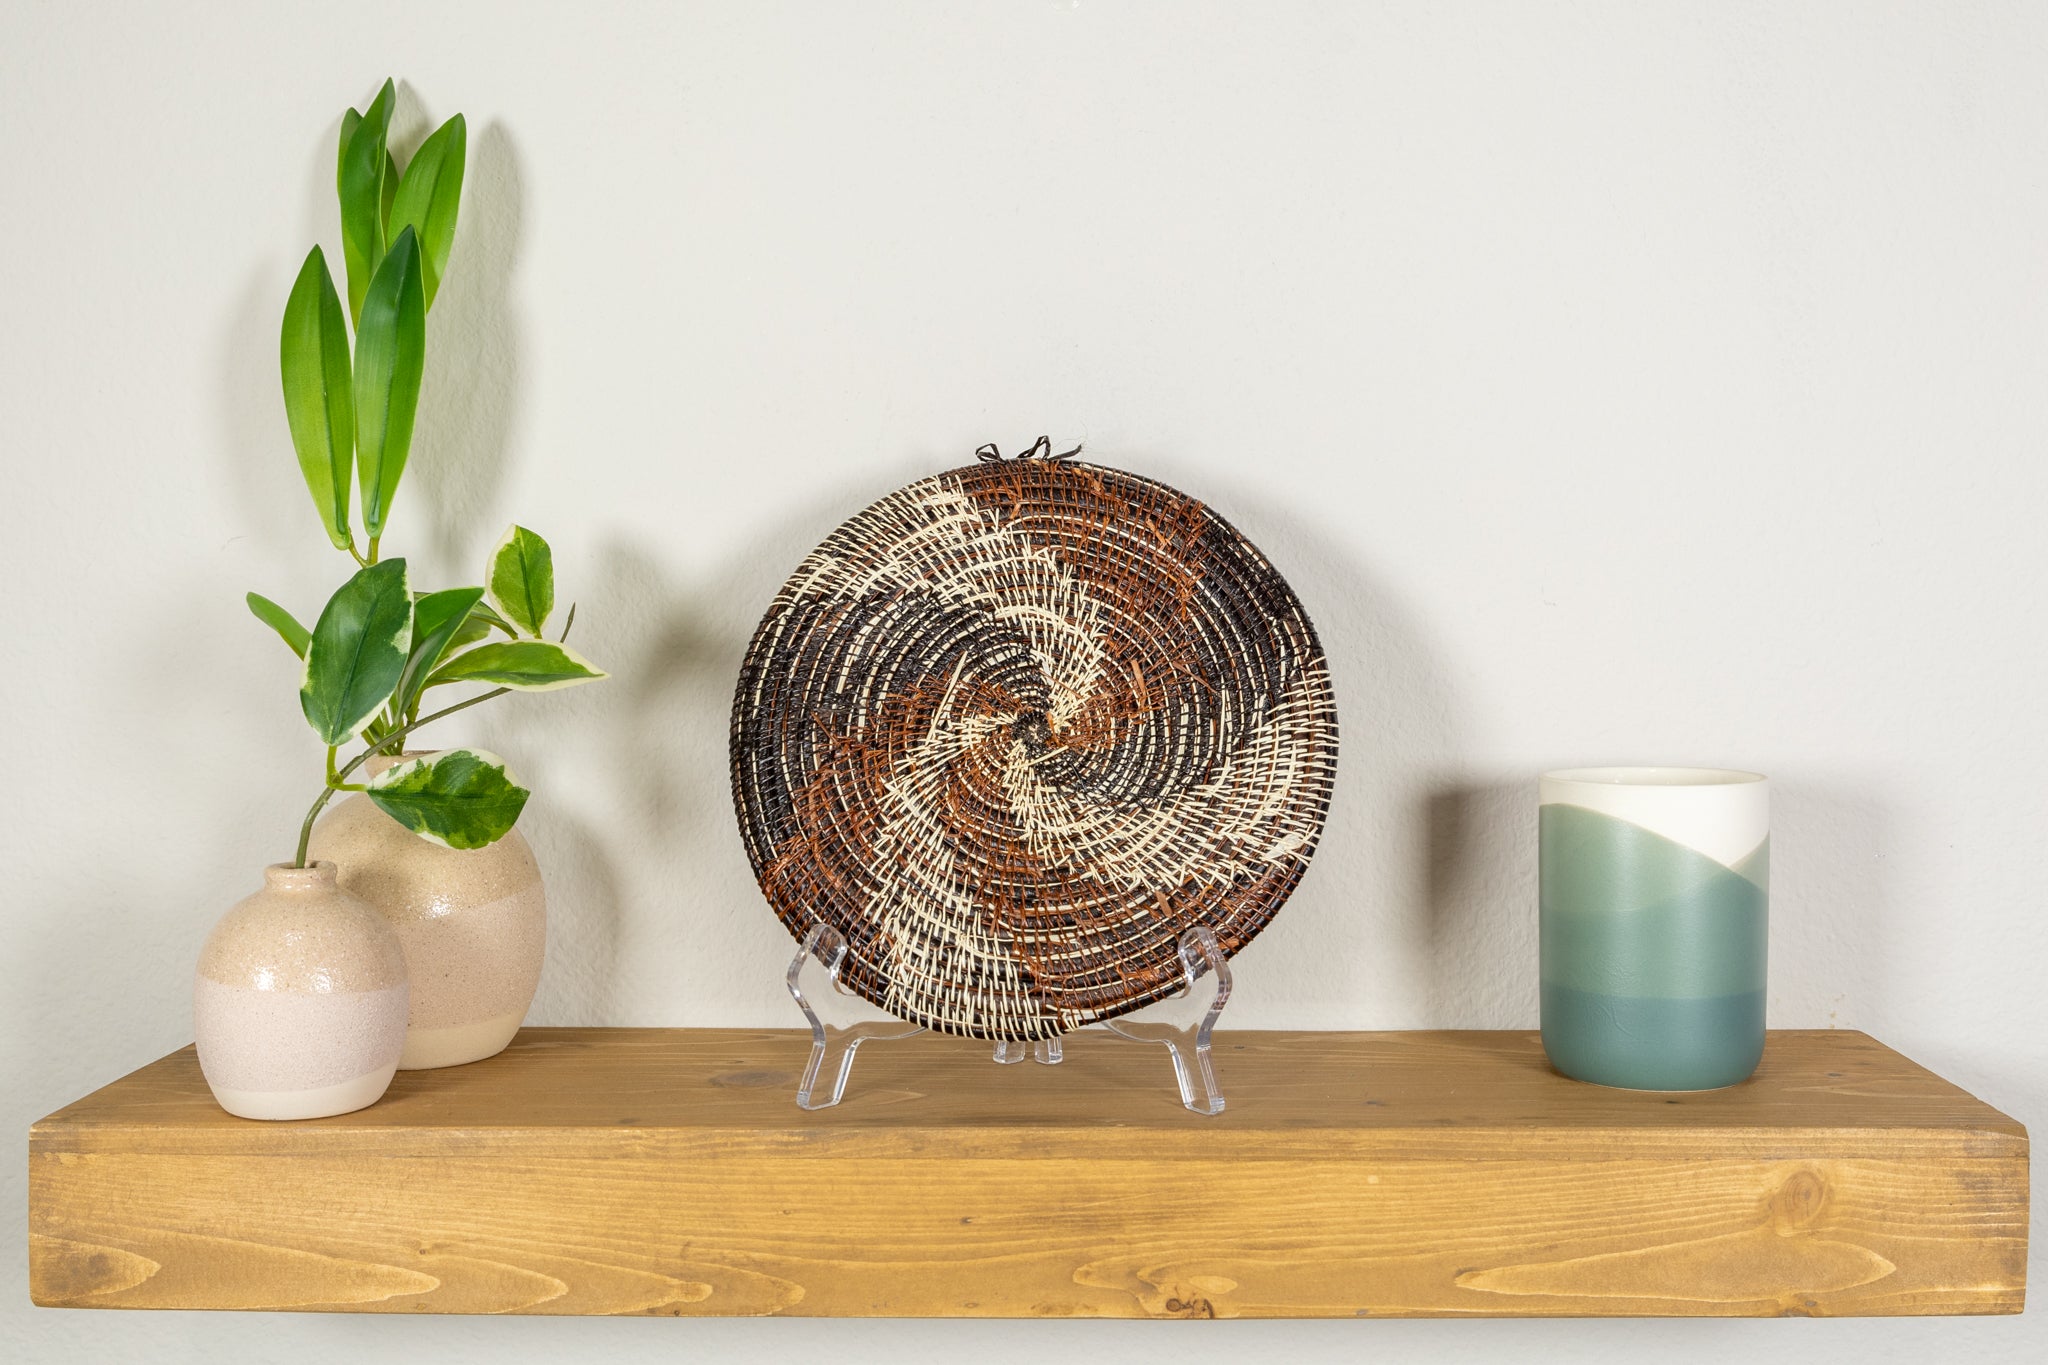 Galaxy Spinning Whirling Spiral Basket Plate